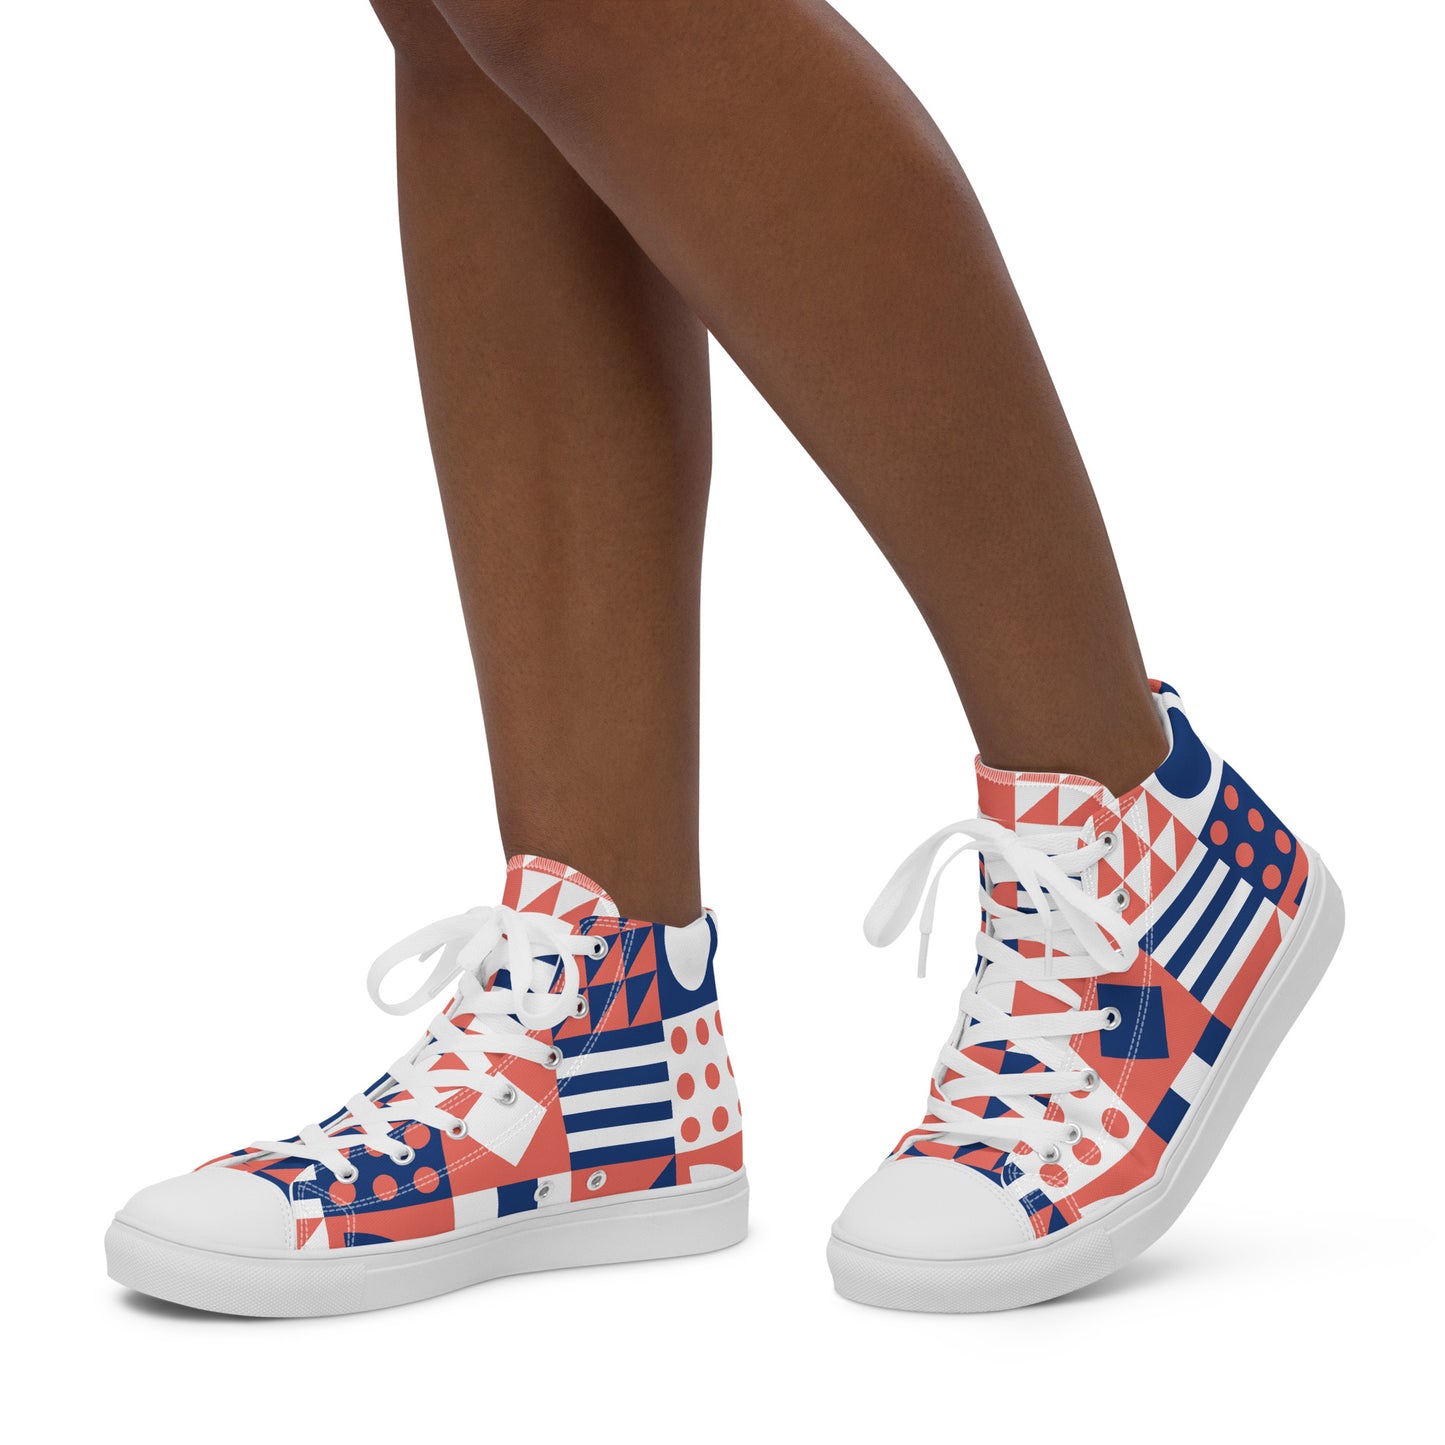 Women’s Patterns high top canvas shoes